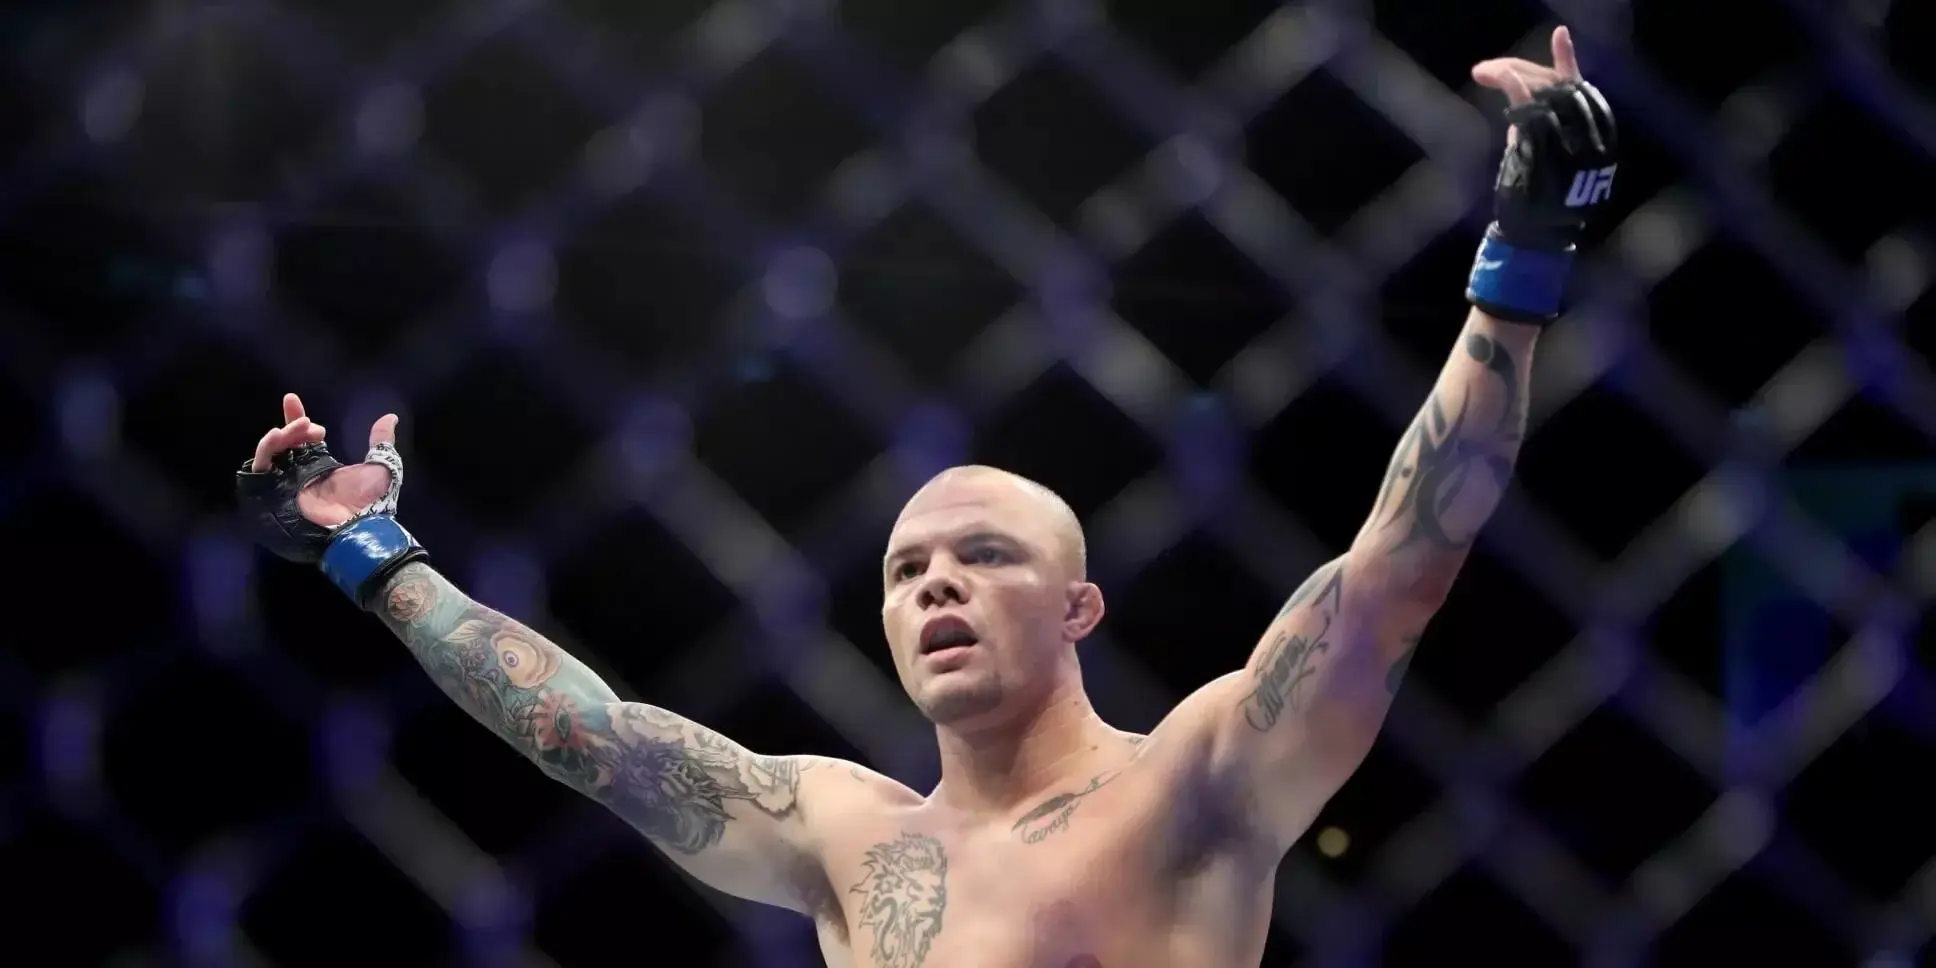 Anthony Smith Shocks Crowd at UFC 301 With Submission Win